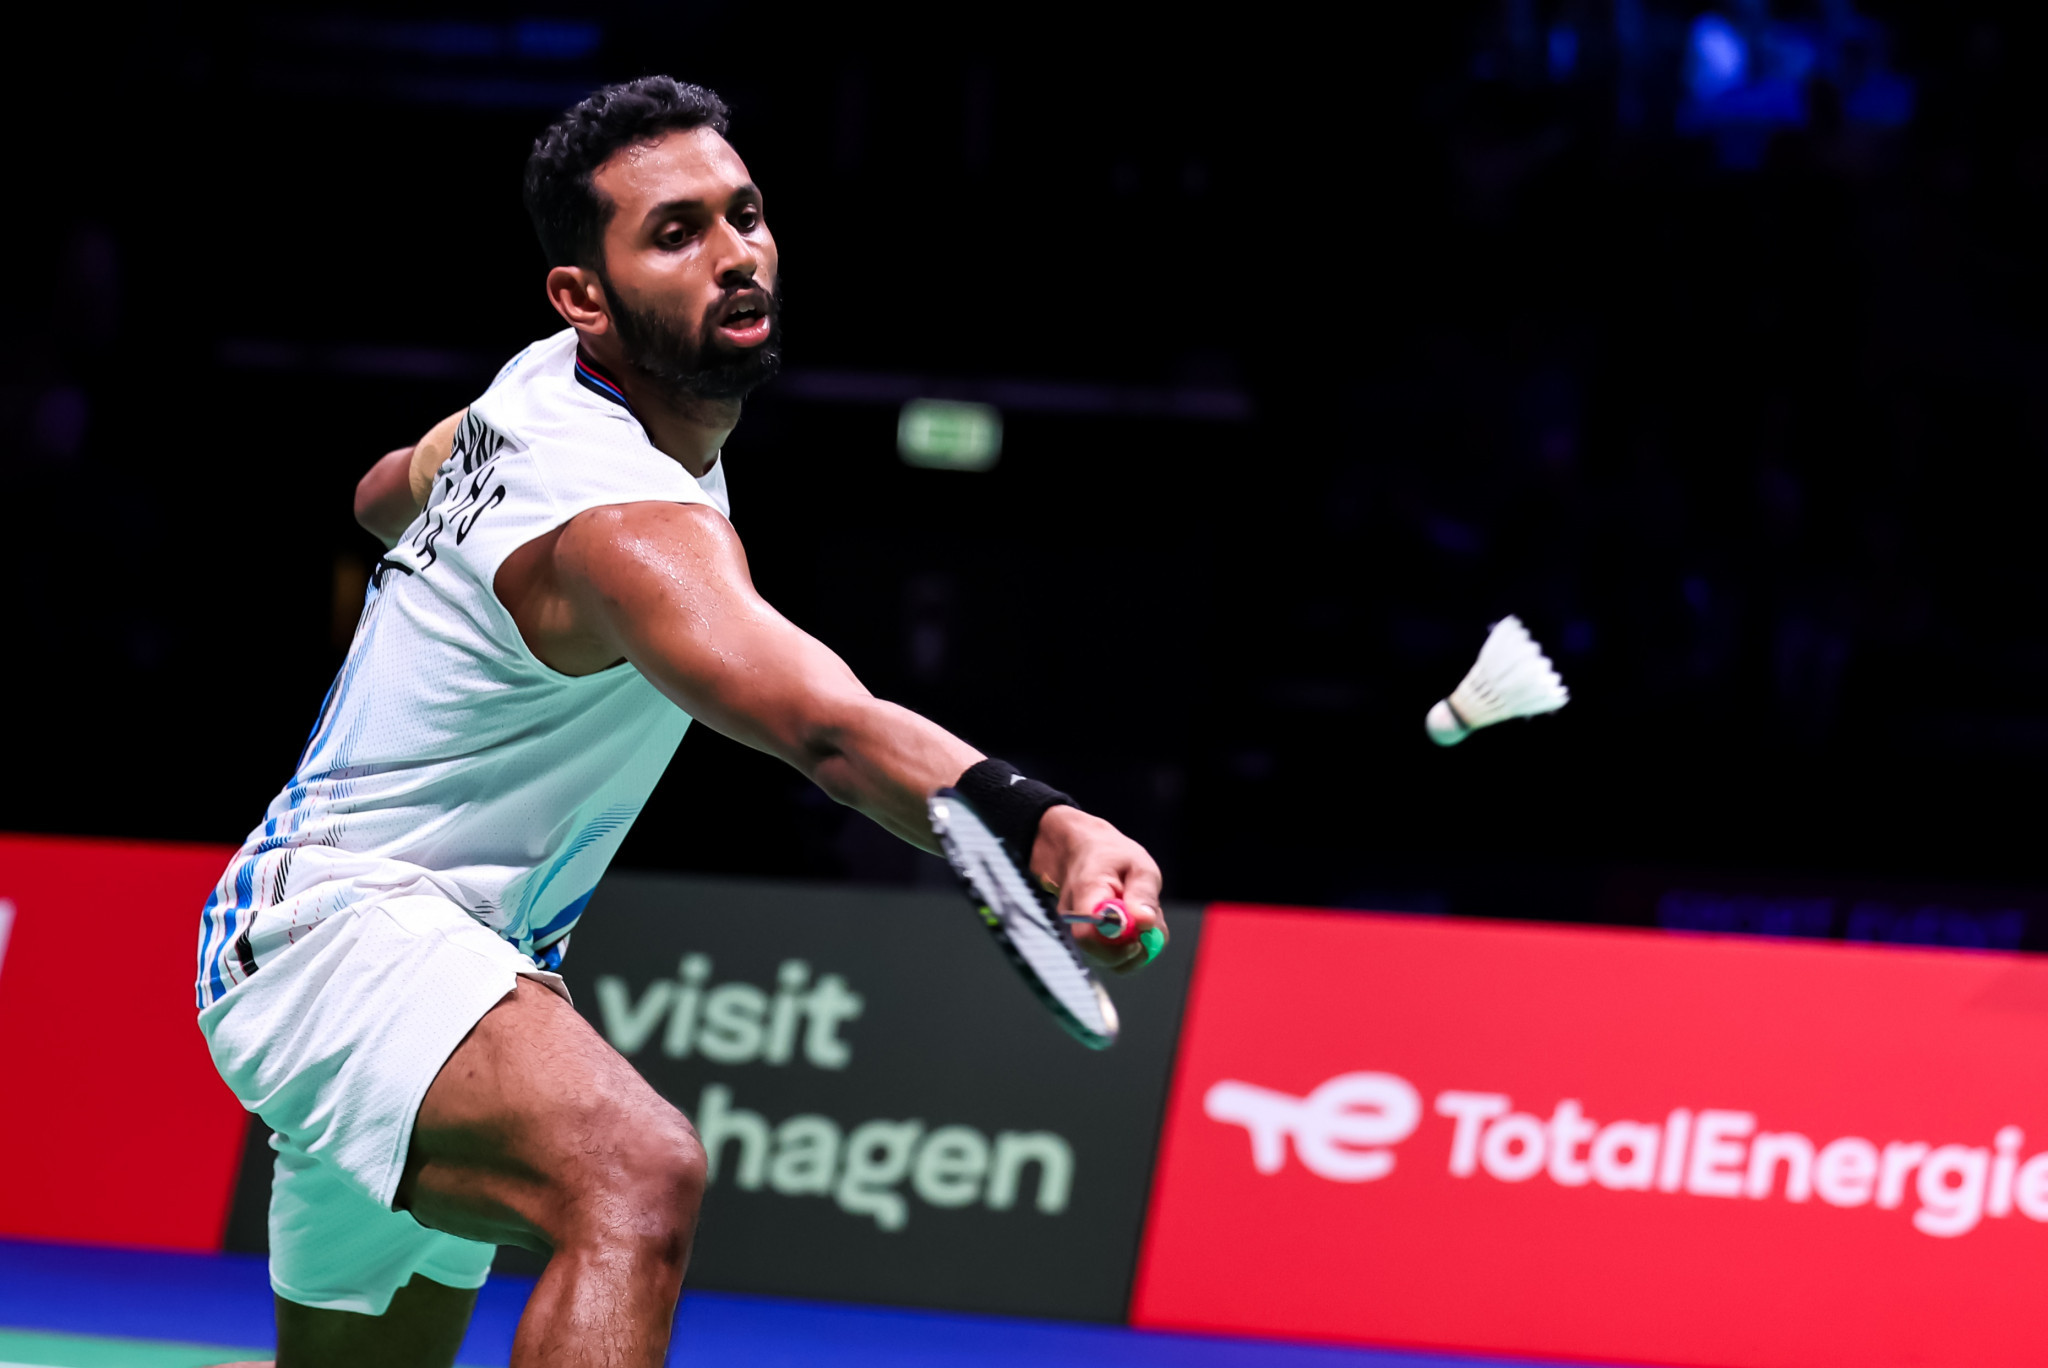 India's HS Prannoy was a game and 5-1 up only to succumb to a Kunlavut Vitidsarn comeback in Copenhagen ©Badmintonphoto